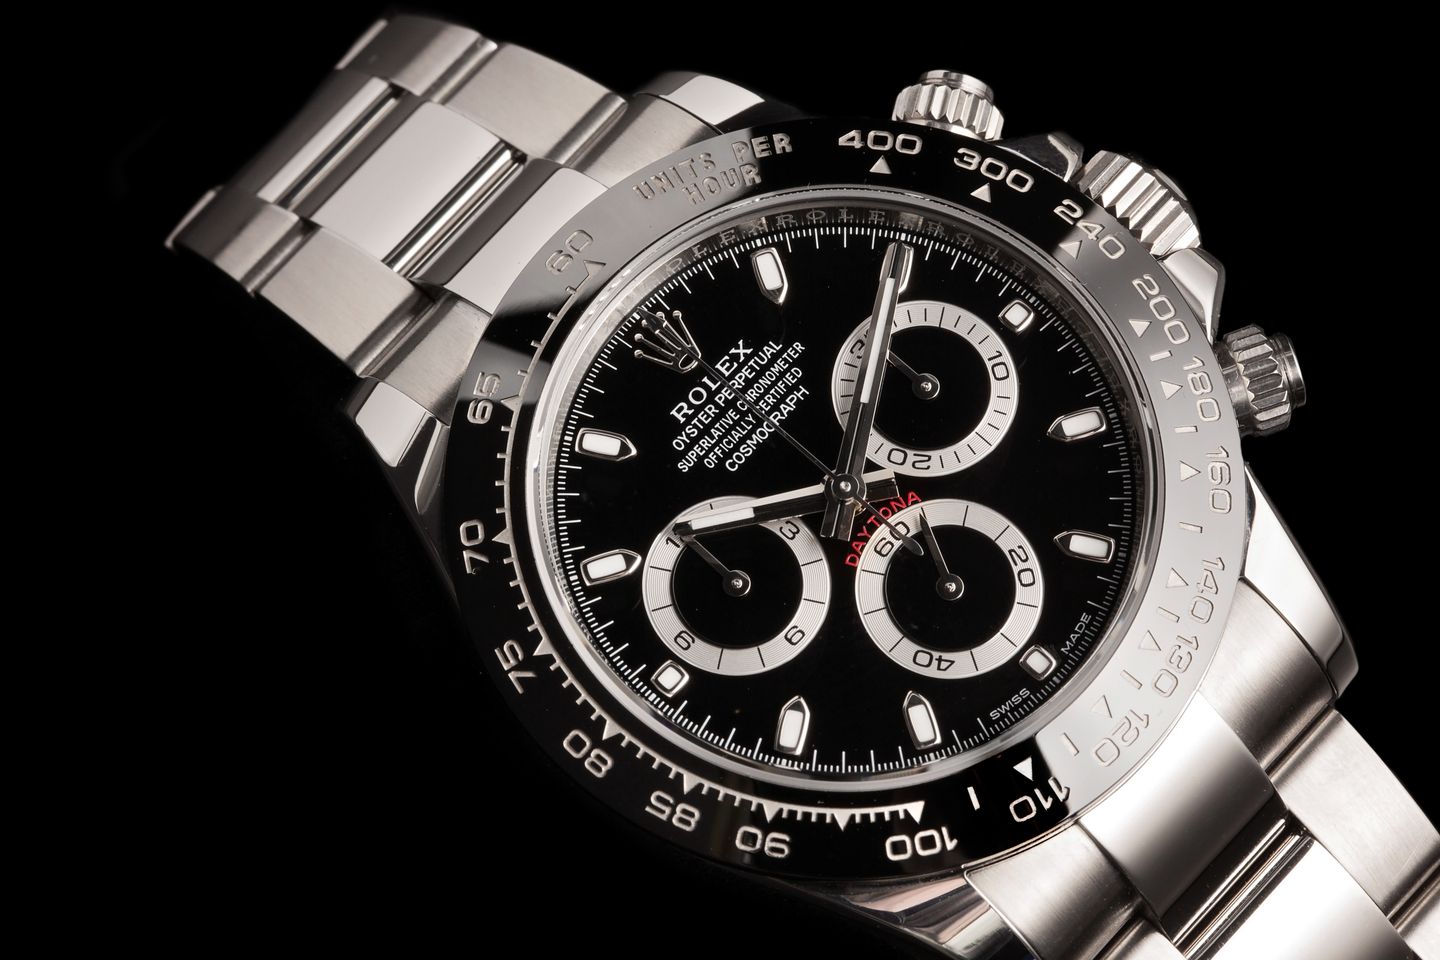 Rolex Stainless Steel Watches – Why Are They So Hard to Get?